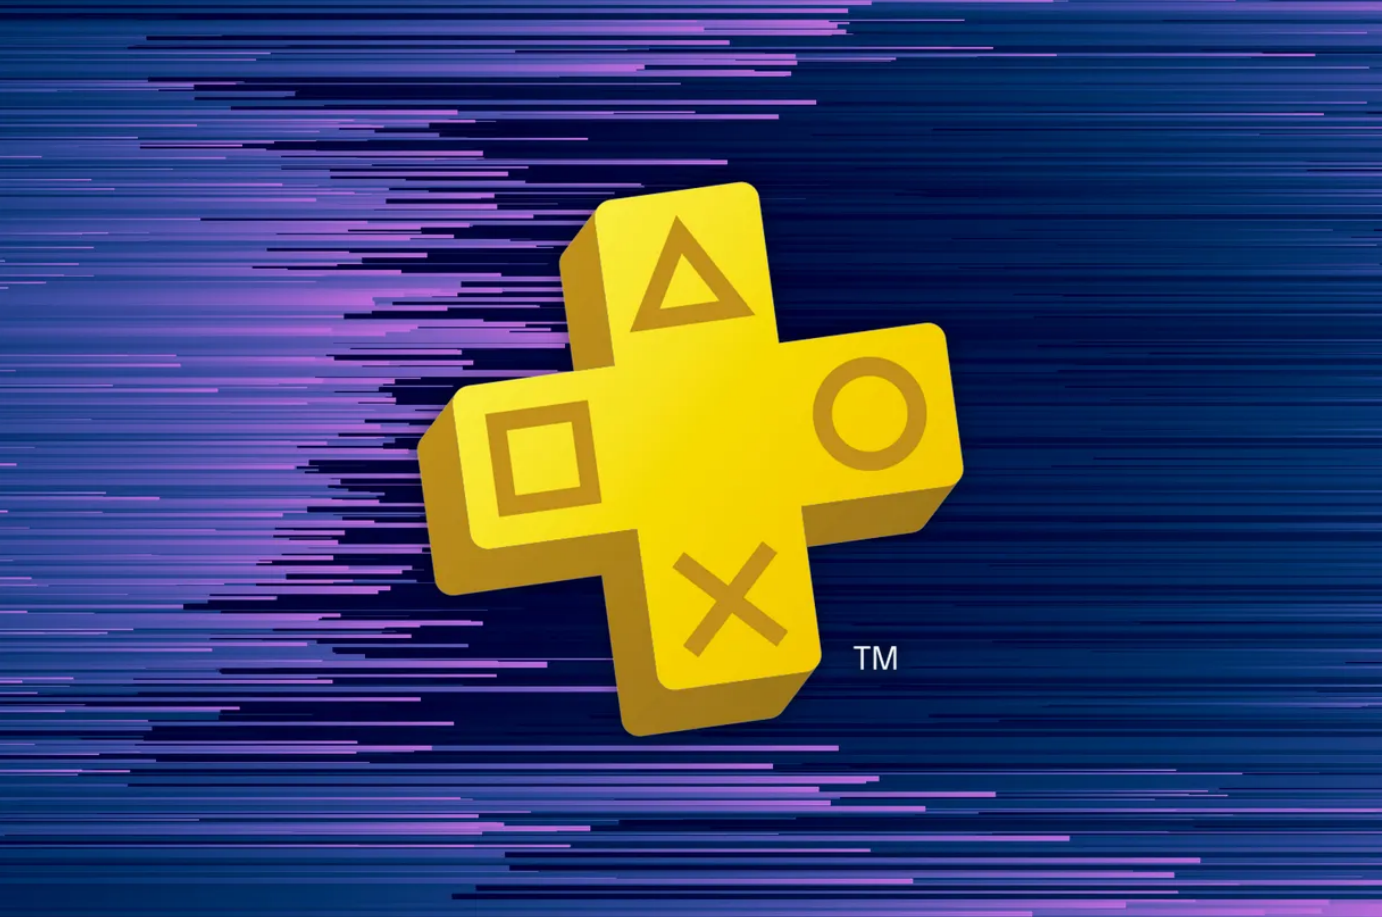 PlayStation Plus Extra - December 2023 (PS+) 